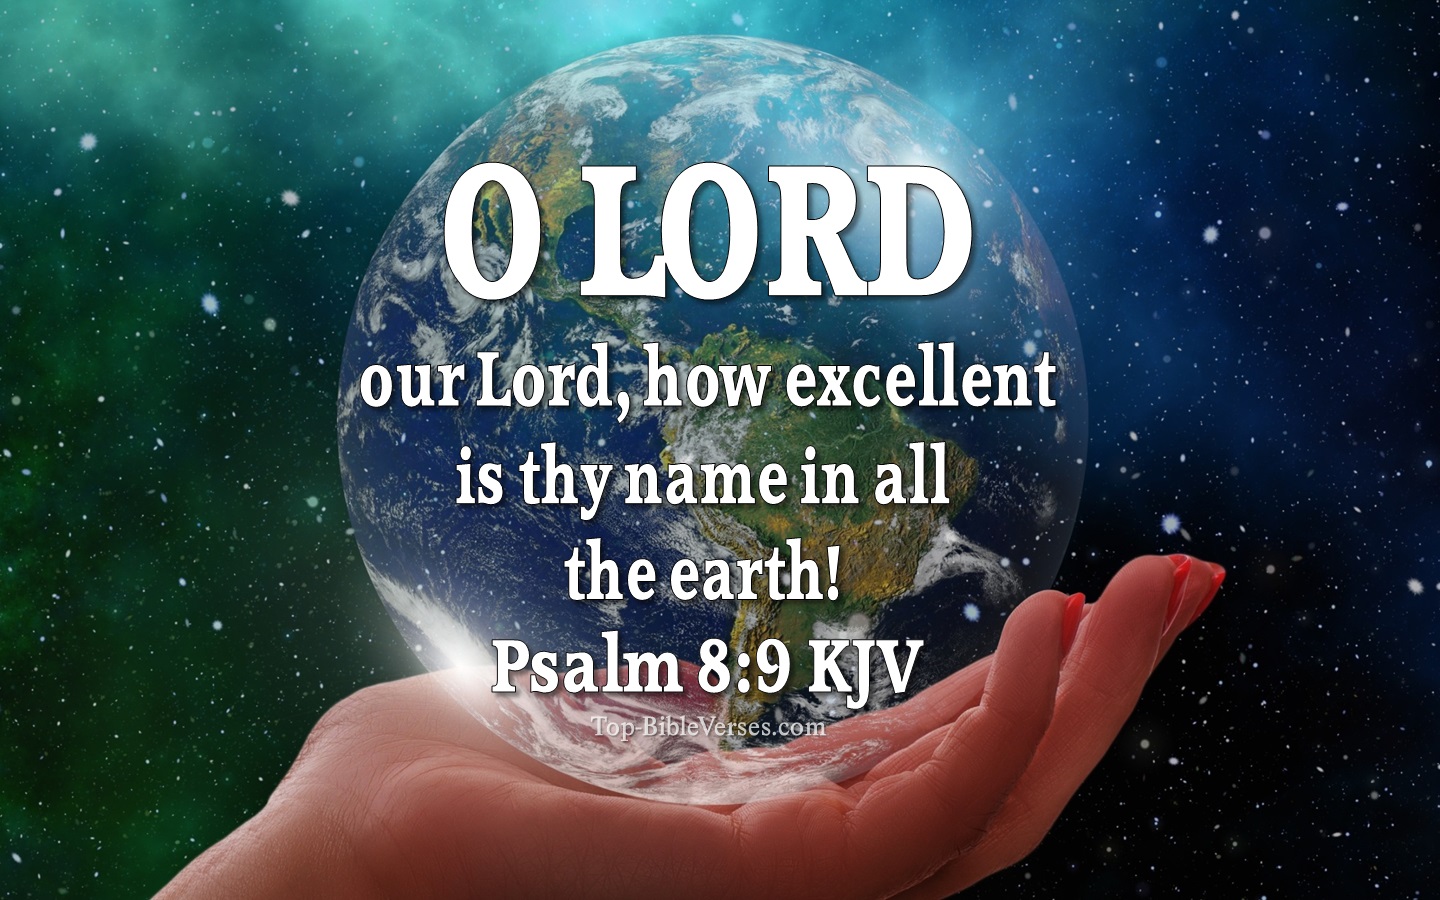 Psalm-8-9-O-LORD-our-Lord-how-excellent-is-thy-name-in-all-the-earth-1.jpg